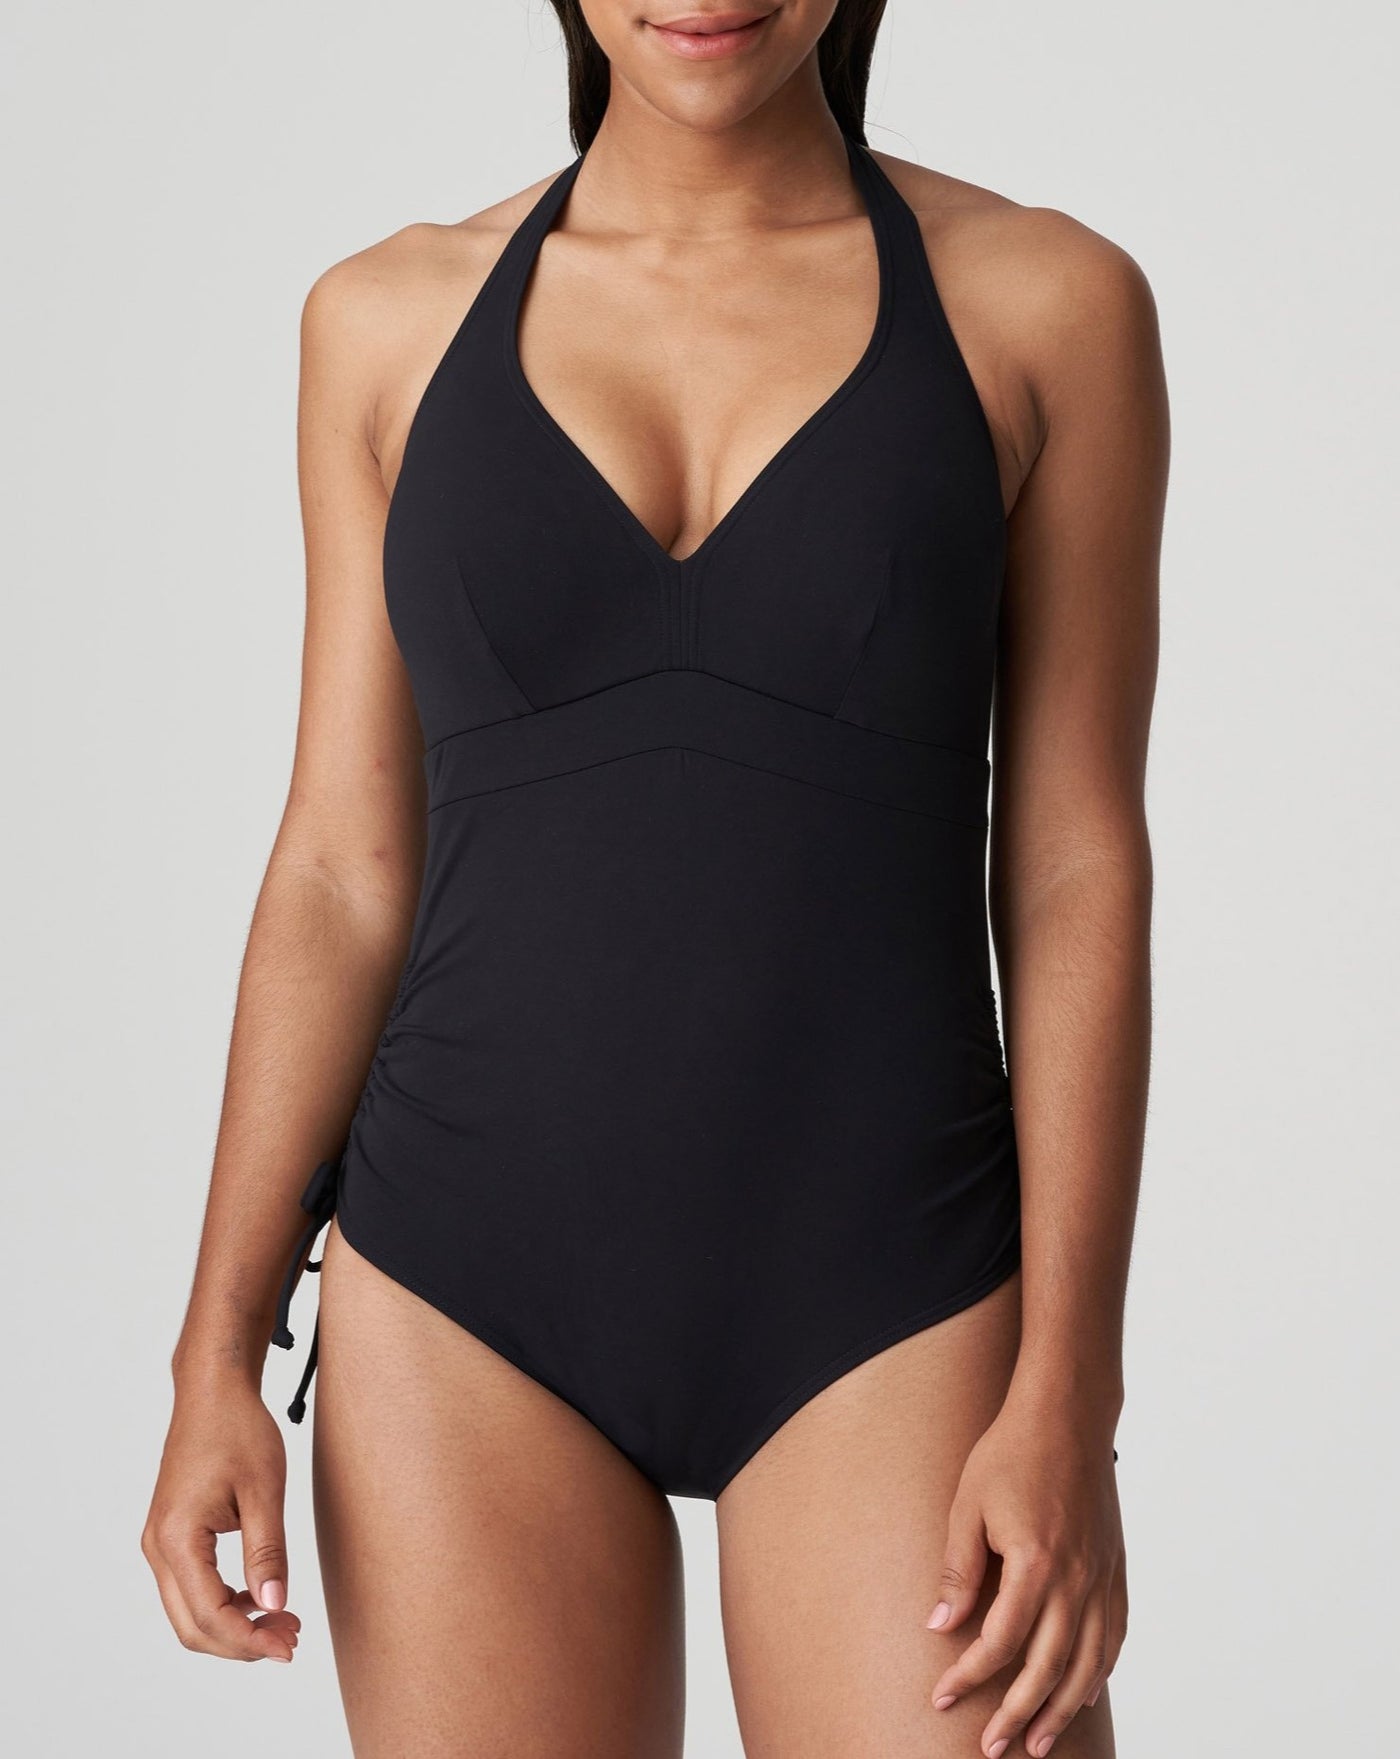 Black Holiday One-Piece - Beestung Lingerie